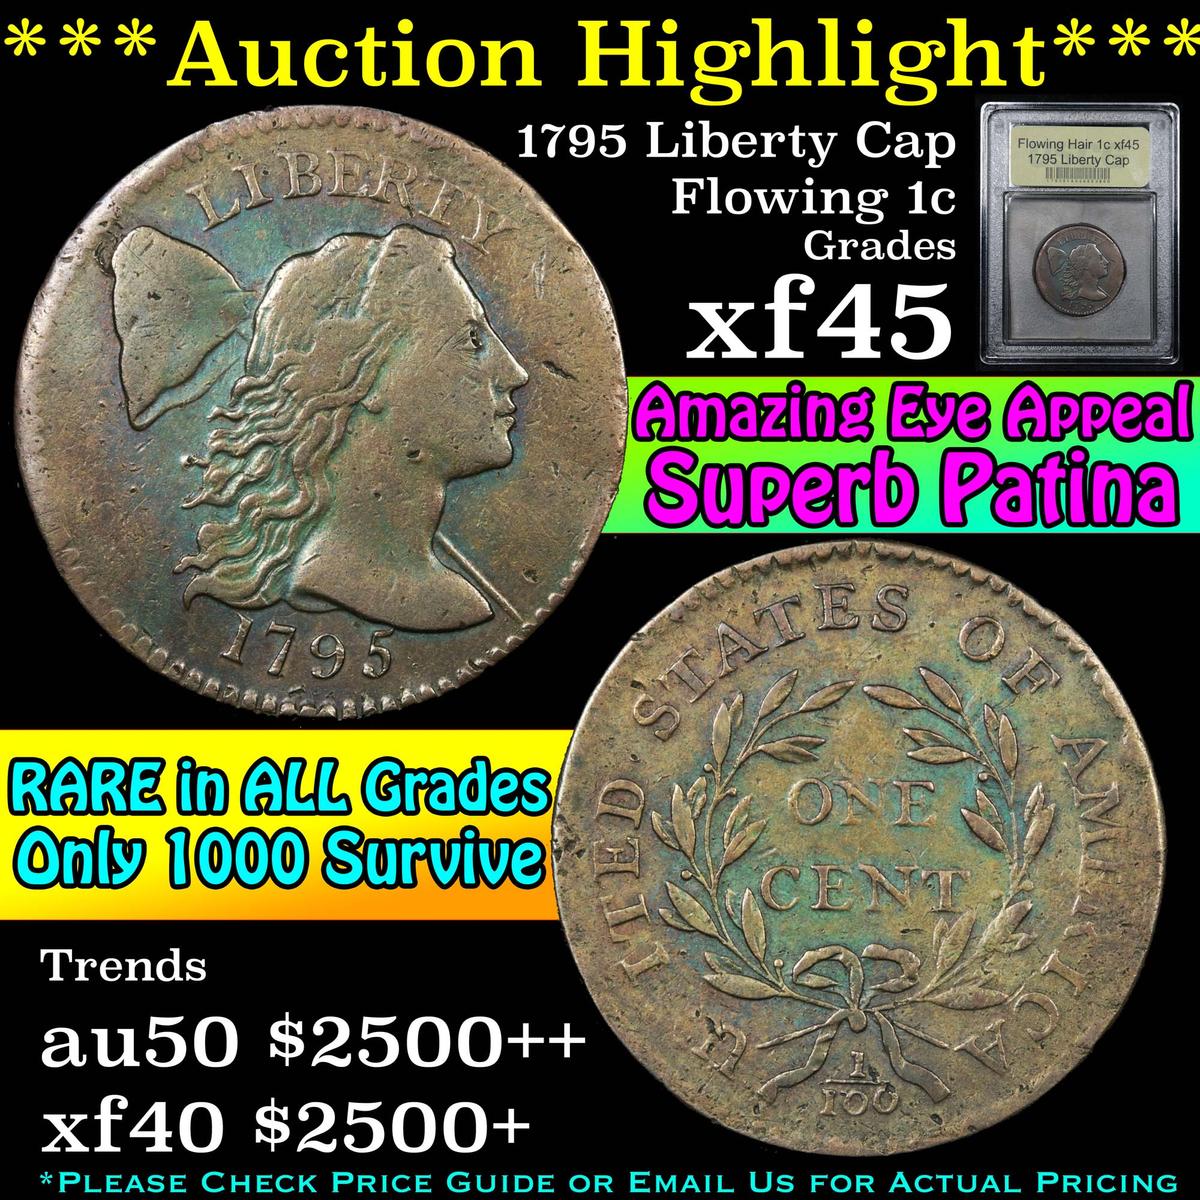 ***Auction Highlight*** 1795 Liberty Cap Flowing Hair large cent 1c Graded xf+ By USCG (fc)